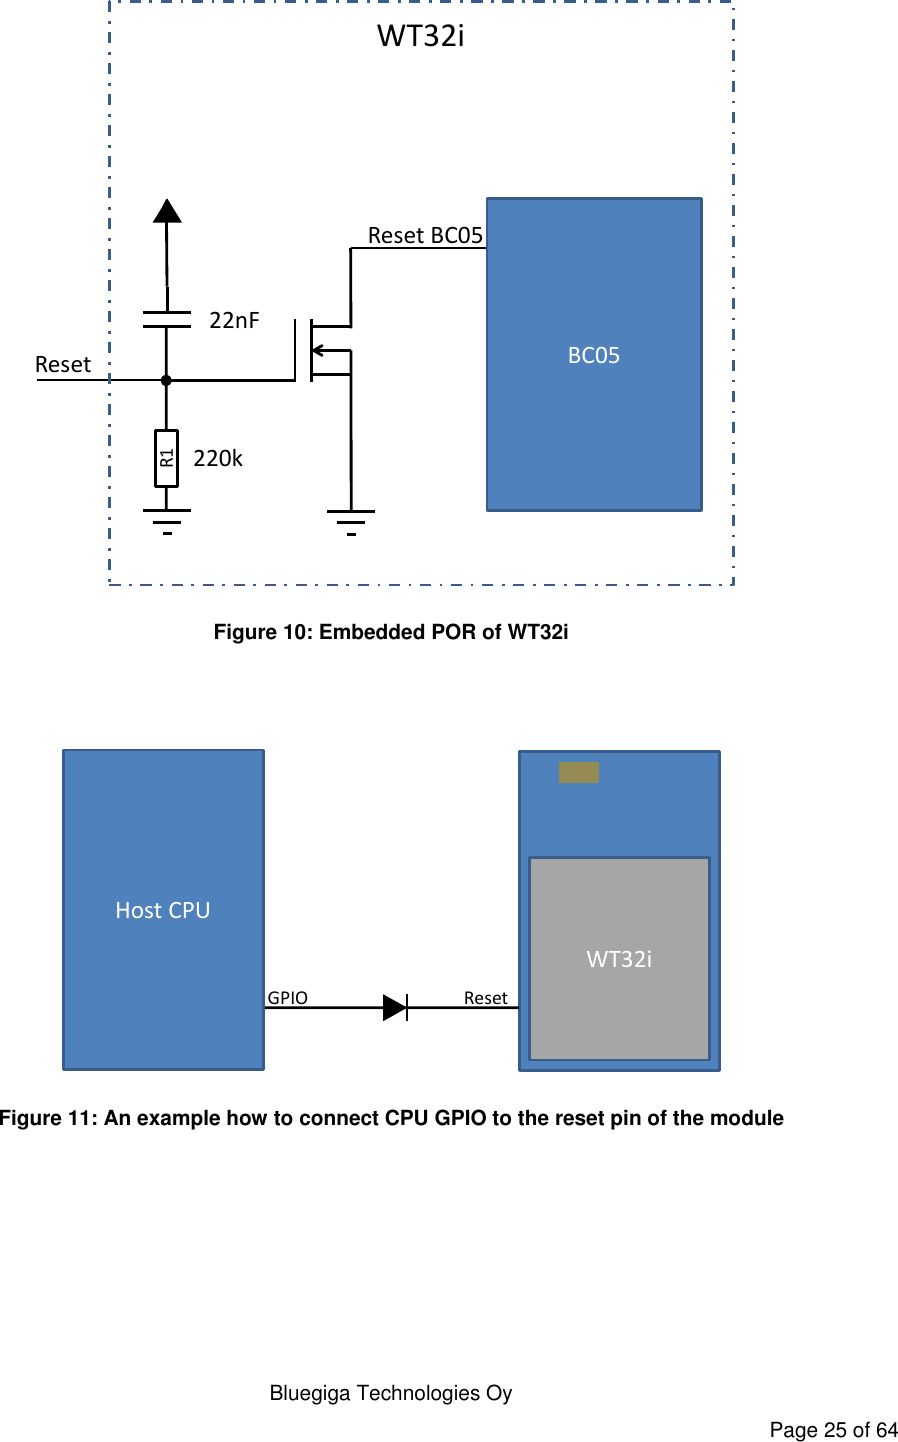   Bluegiga Technologies Oy Page 25 of 64 R1Reset BC05Reset22nF220kWT32iBC05 Figure 10: Embedded POR of WT32i    WT32iResetHost CPUGPIO Figure 11: An example how to connect CPU GPIO to the reset pin of the module   